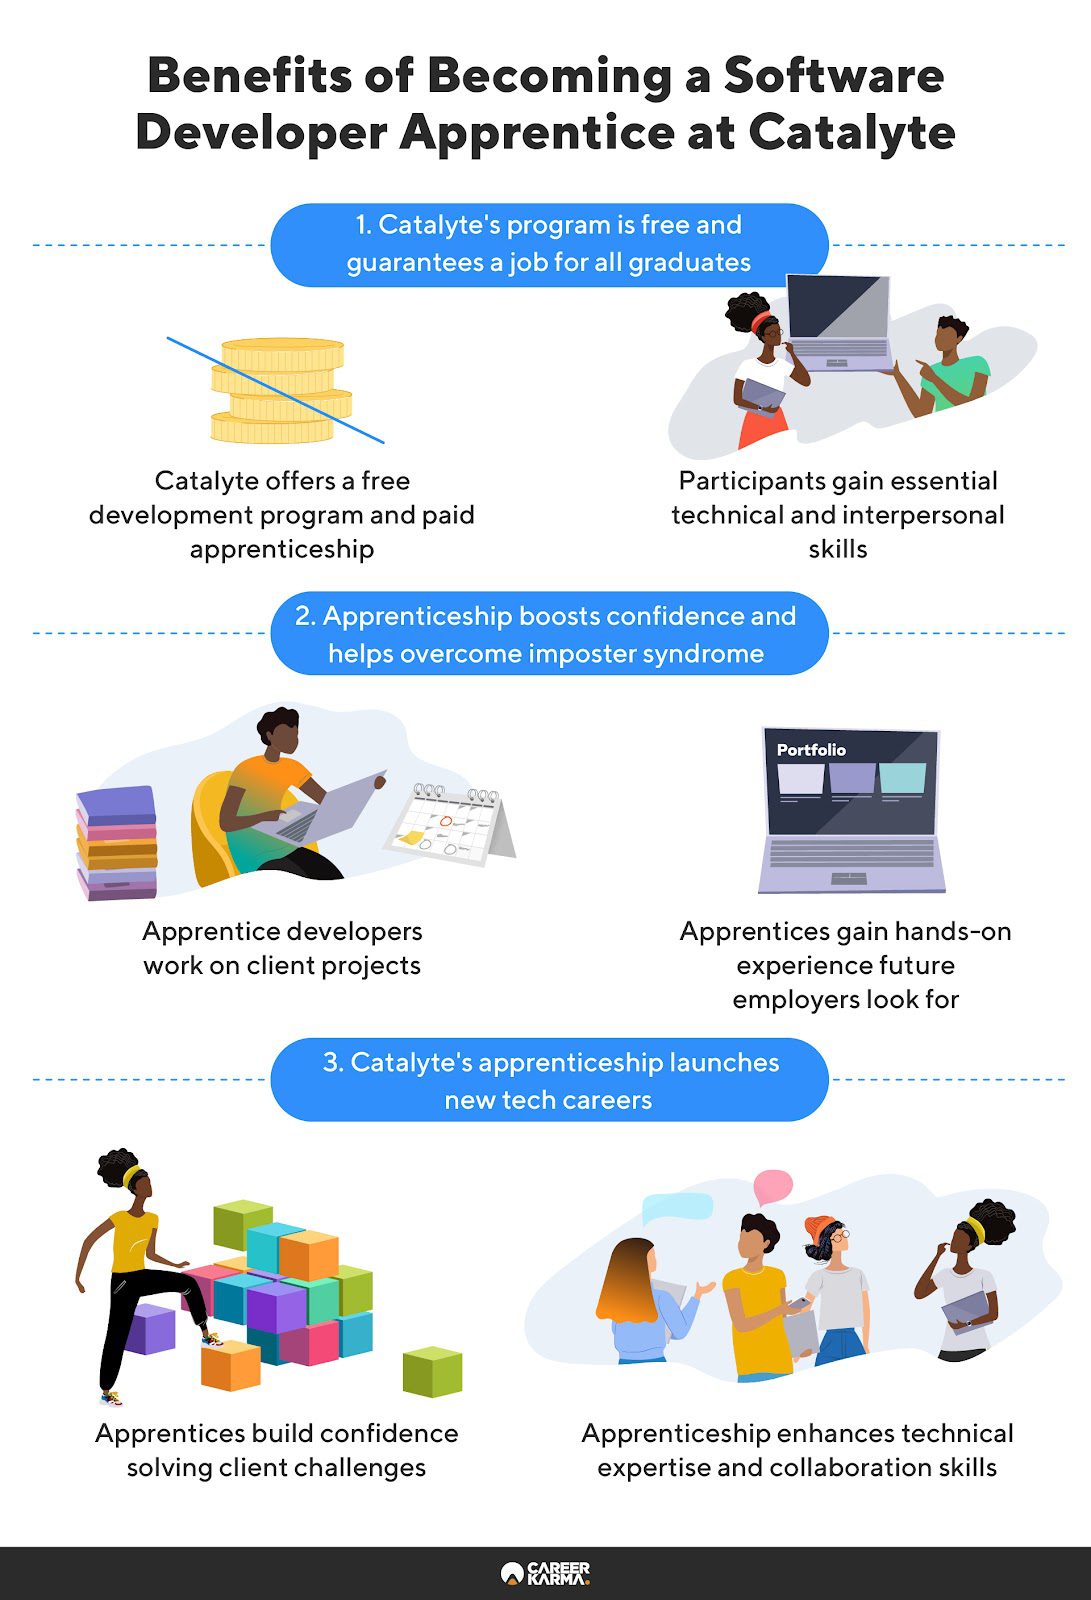 An infographic highlighting the benefits of joining Catalyte’s Software Development Apprenticeship Program